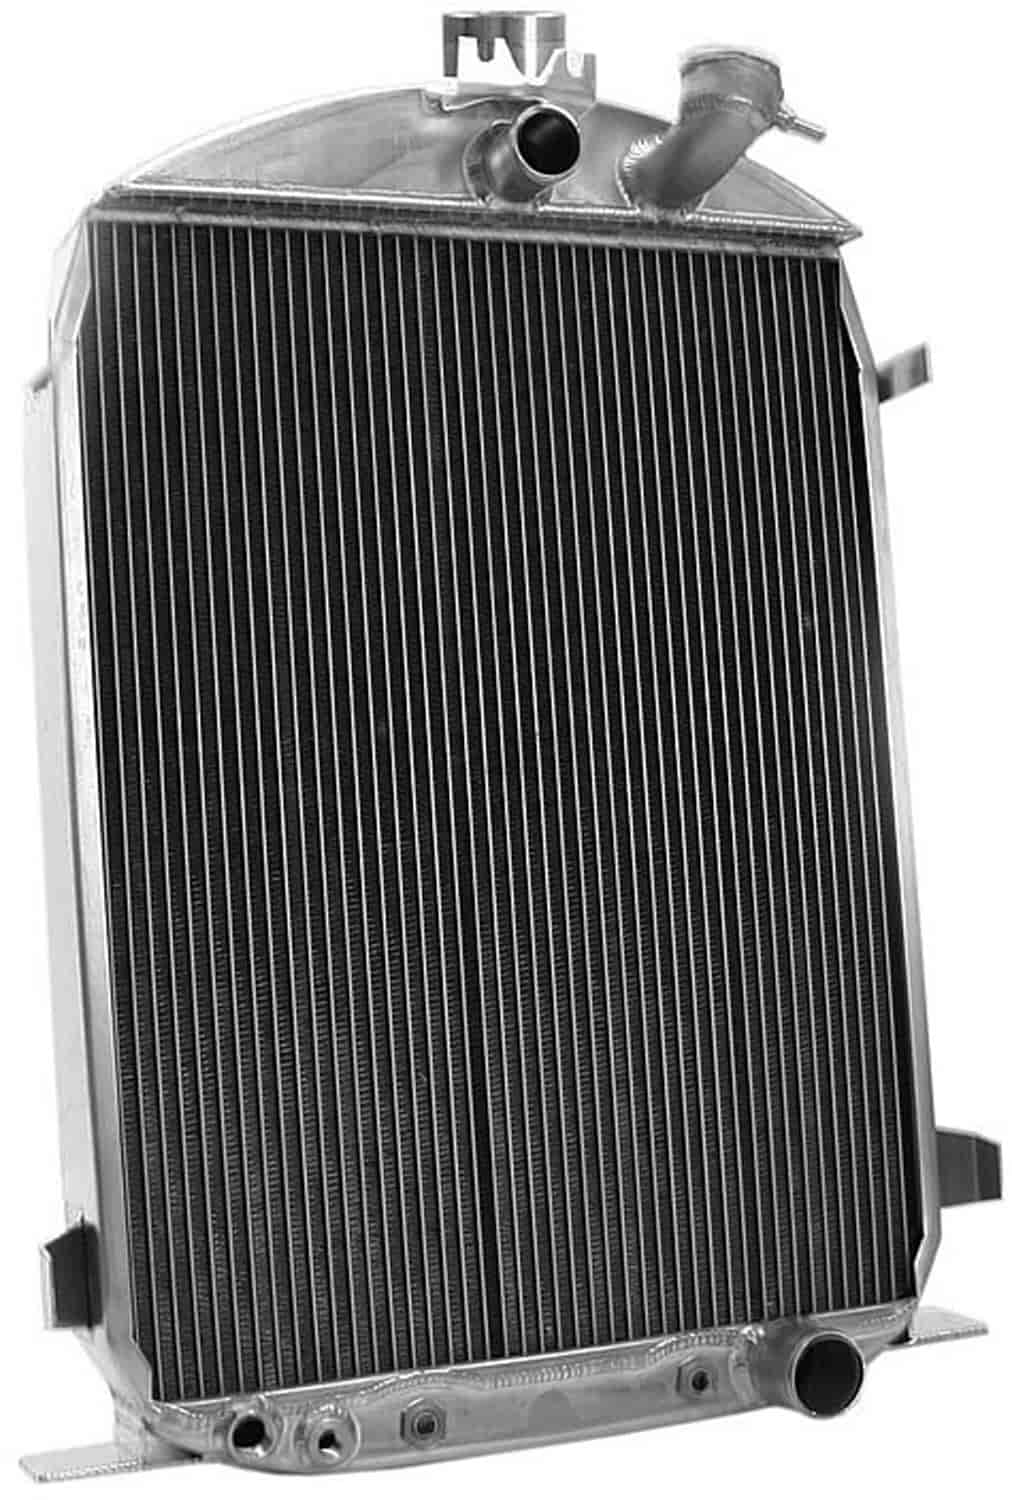 ExactFit Radiator for 1930-1931 Model A with Early